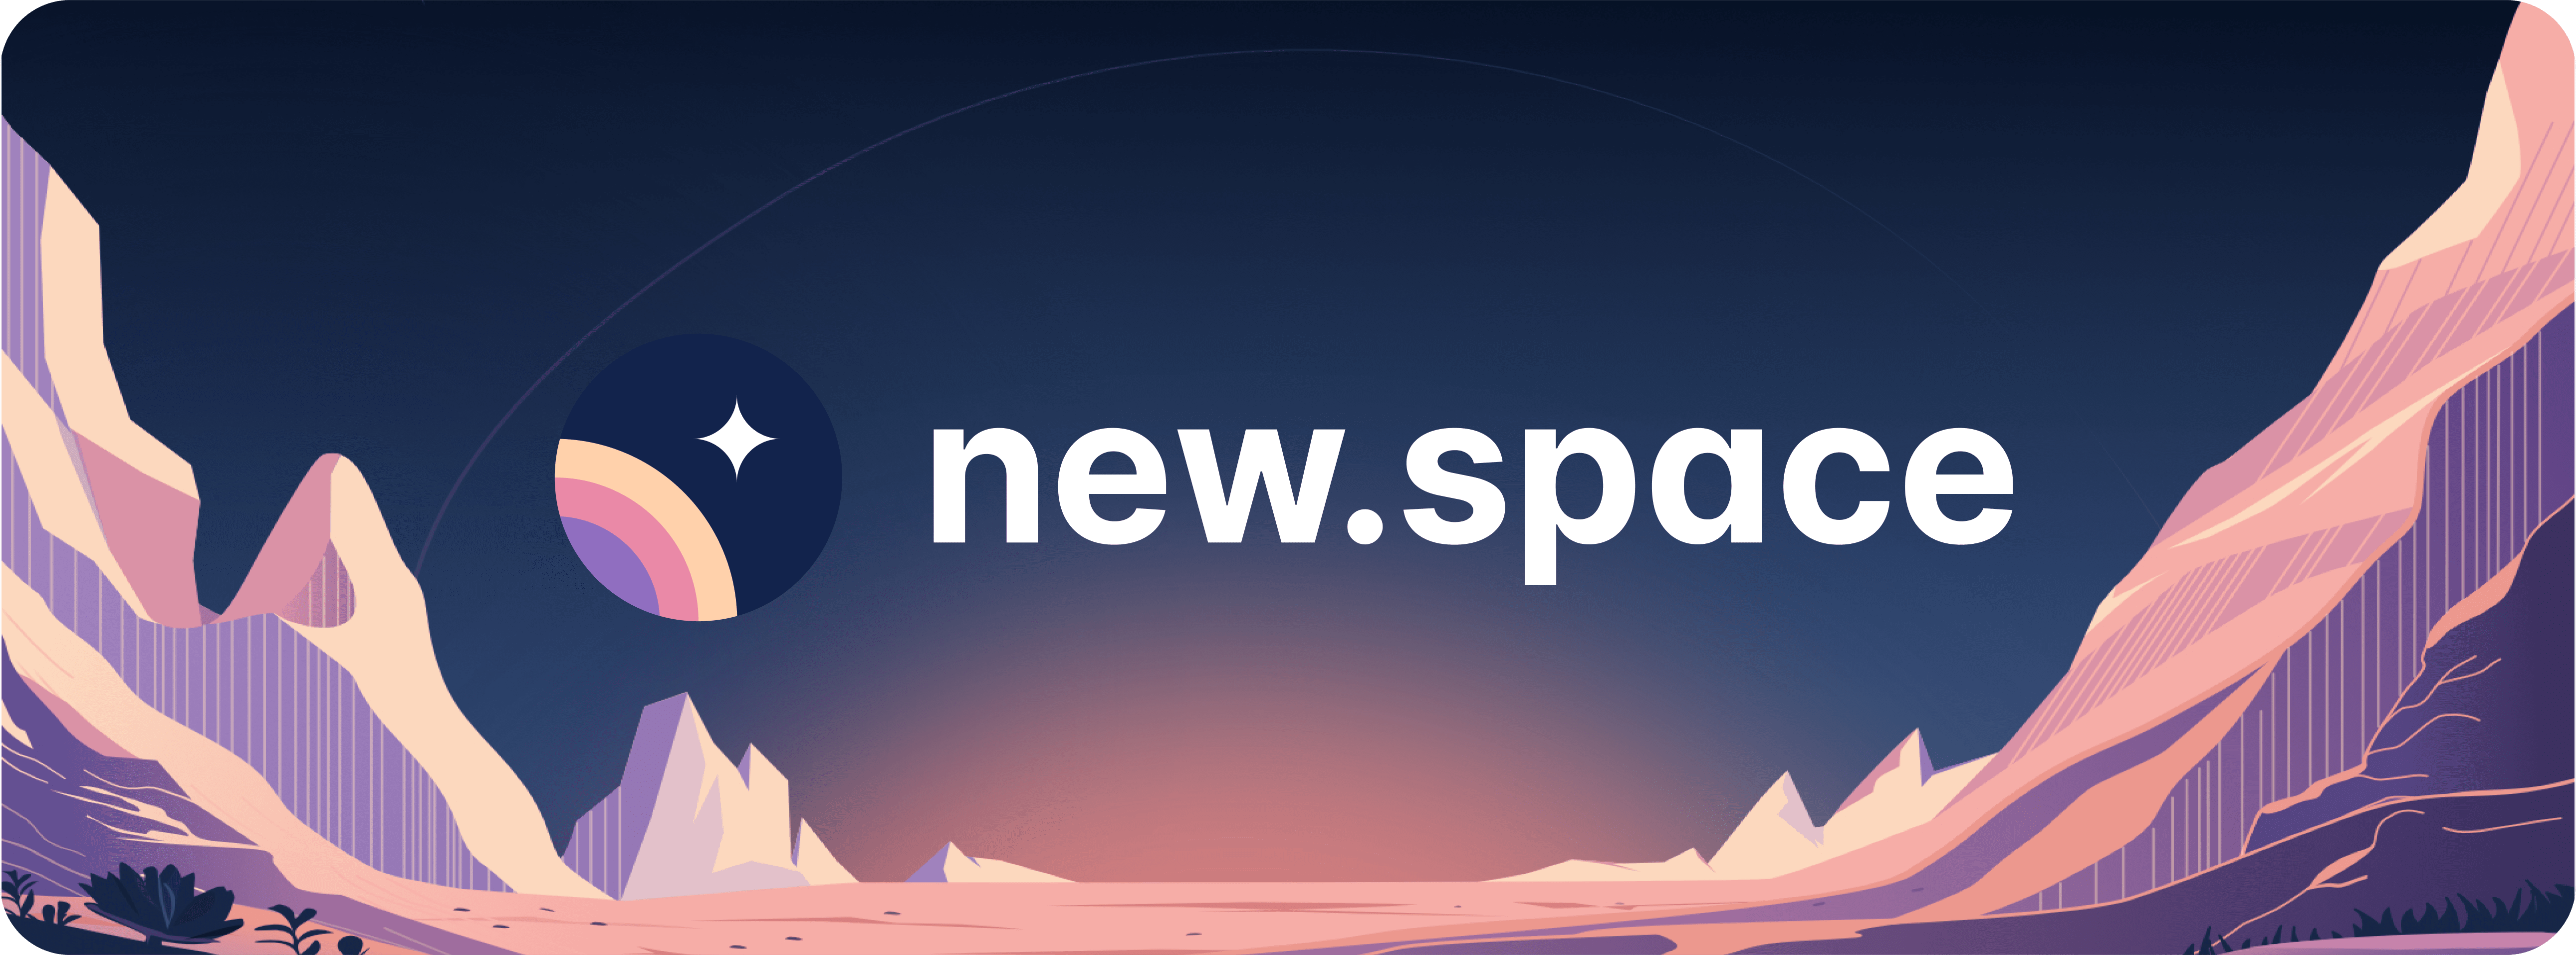 new.space